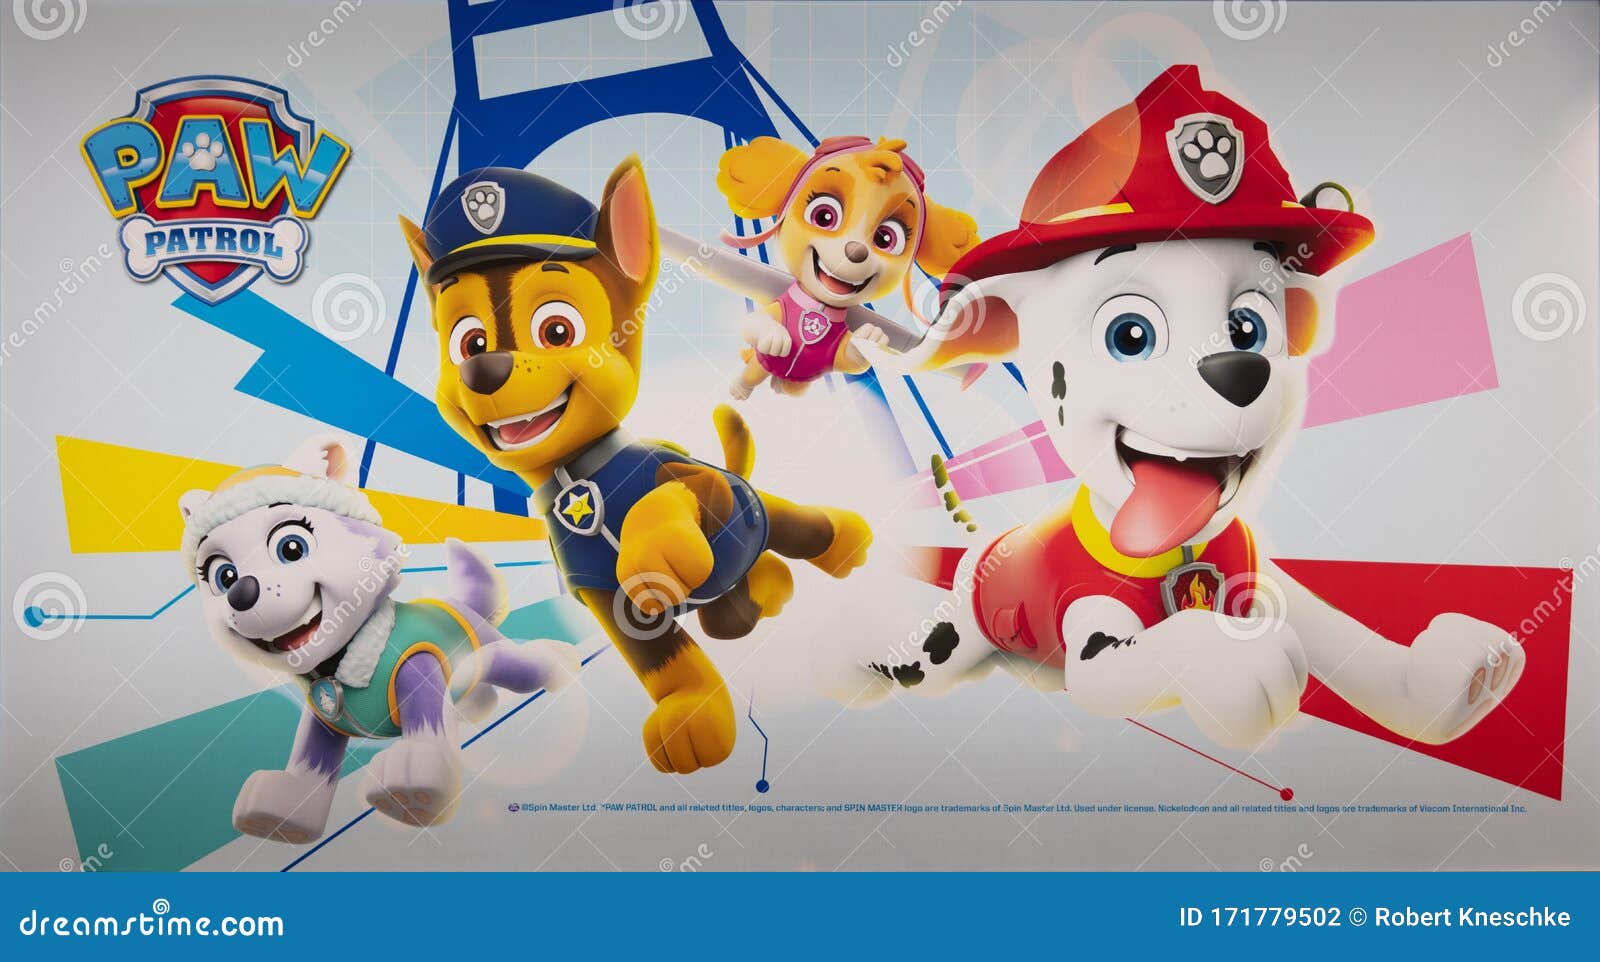 ingeniør Abnorm falsk 163 Paw Patrol Photos - Free & Royalty-Free Stock Photos from Dreamstime